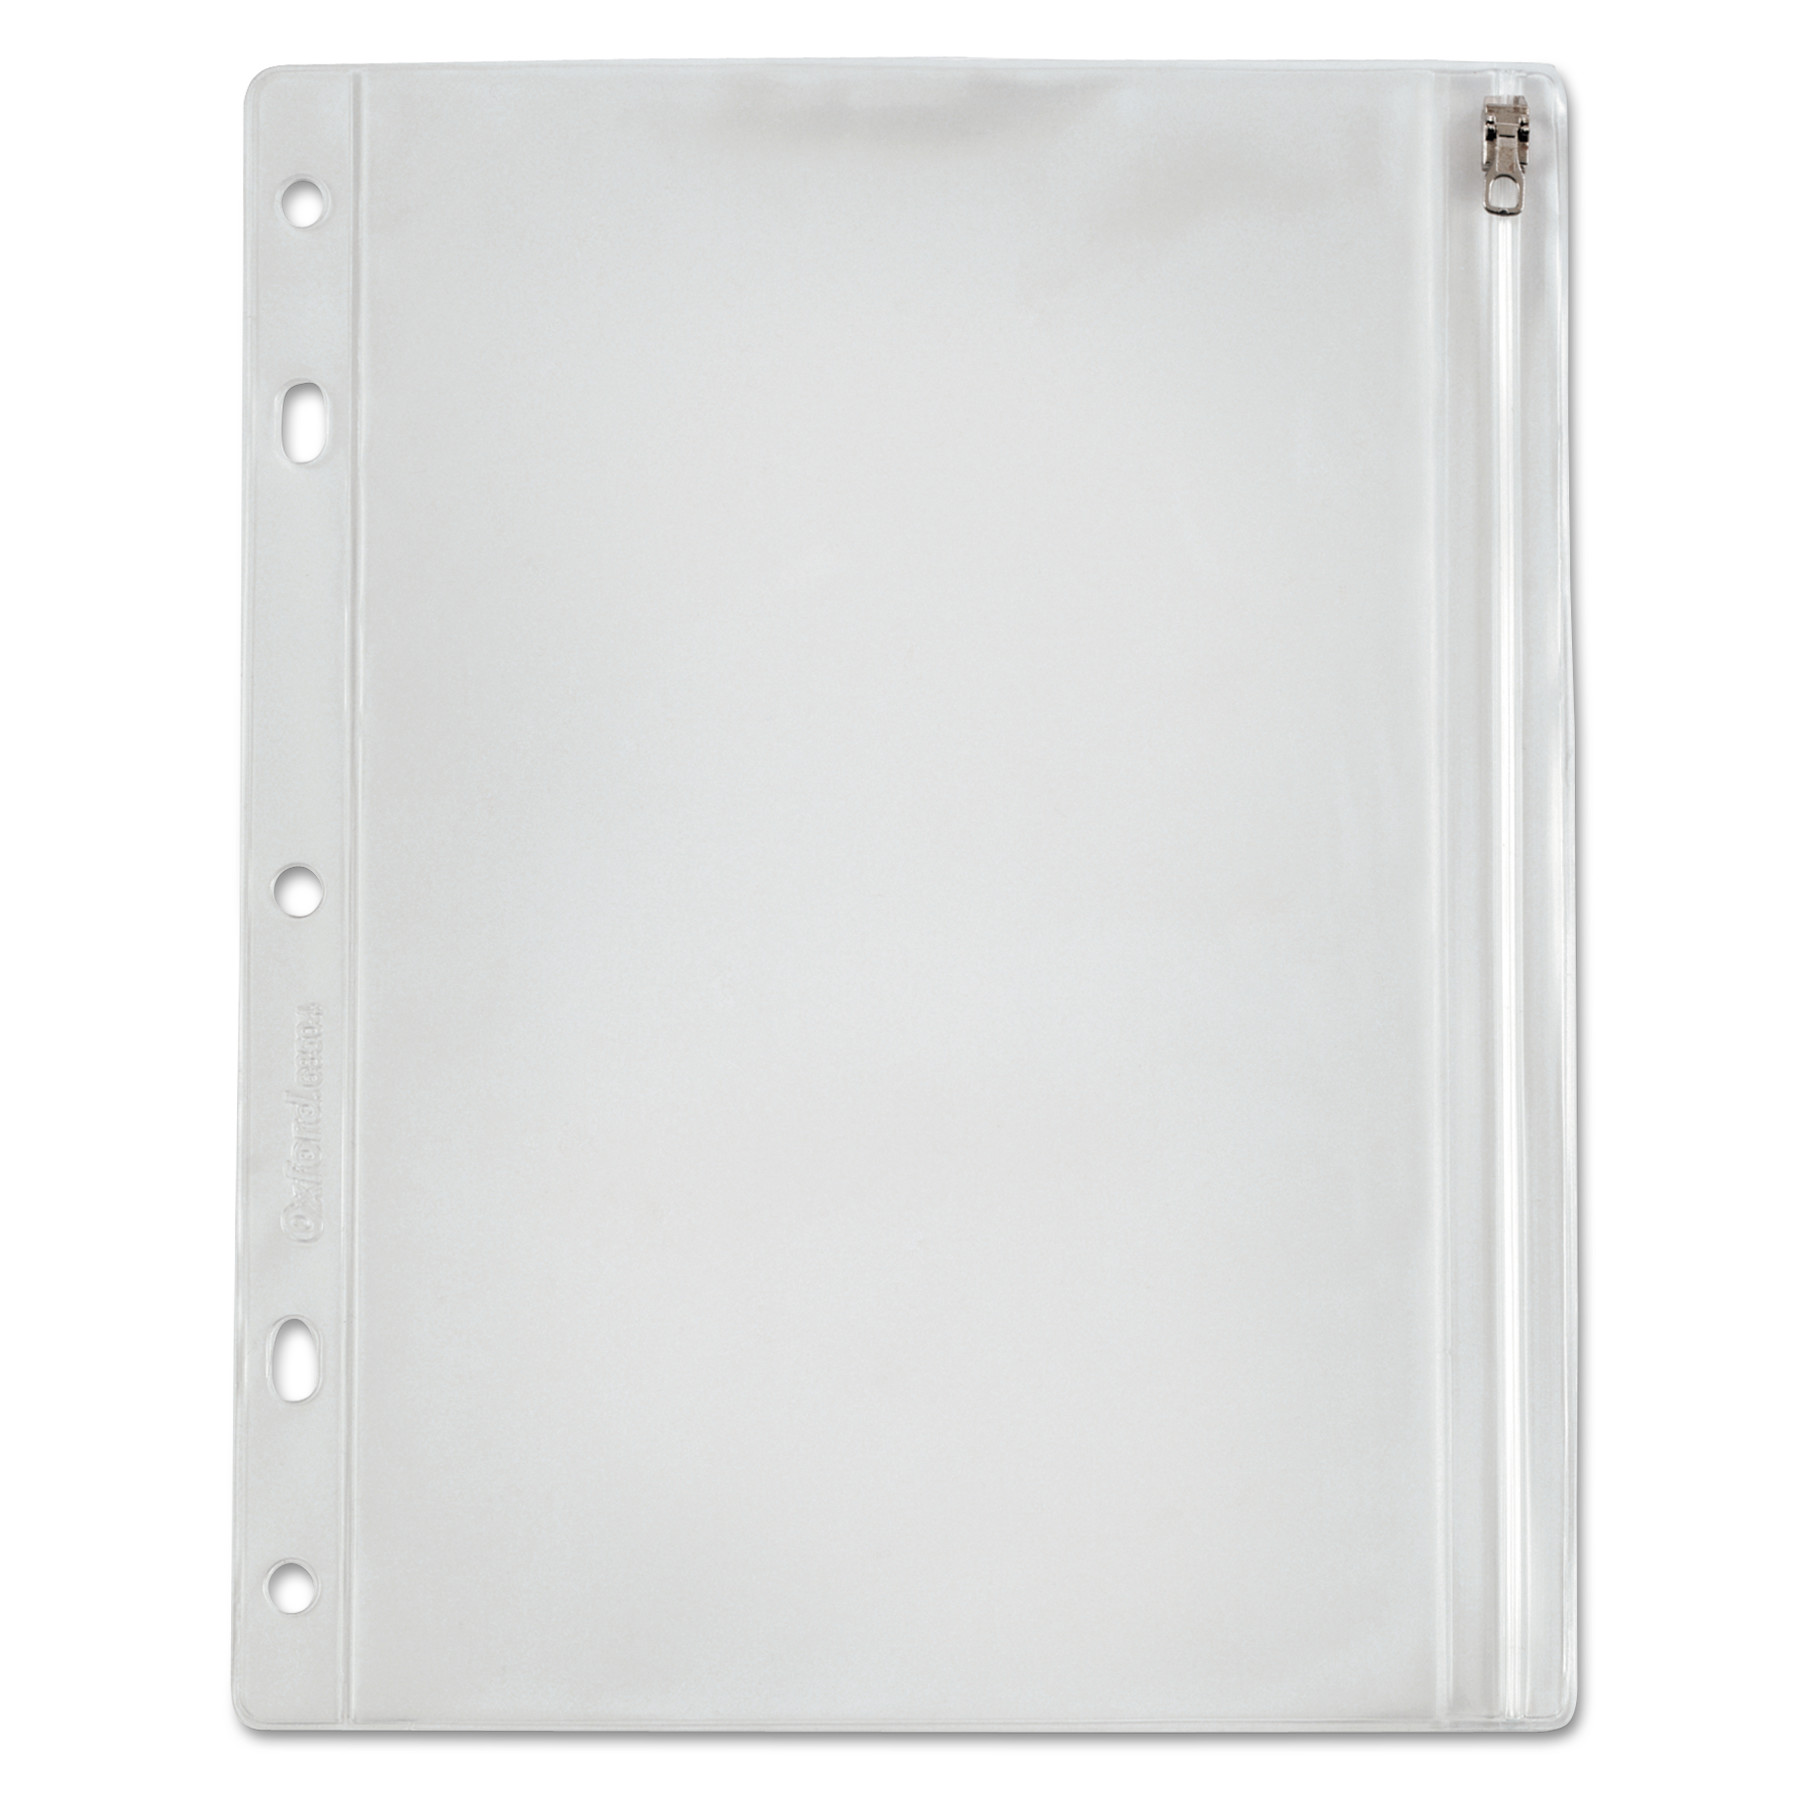  Oxford 68504 Zippered Ring Binder Pocket, 10 1/2 x 8, Clear (OXF68504) 